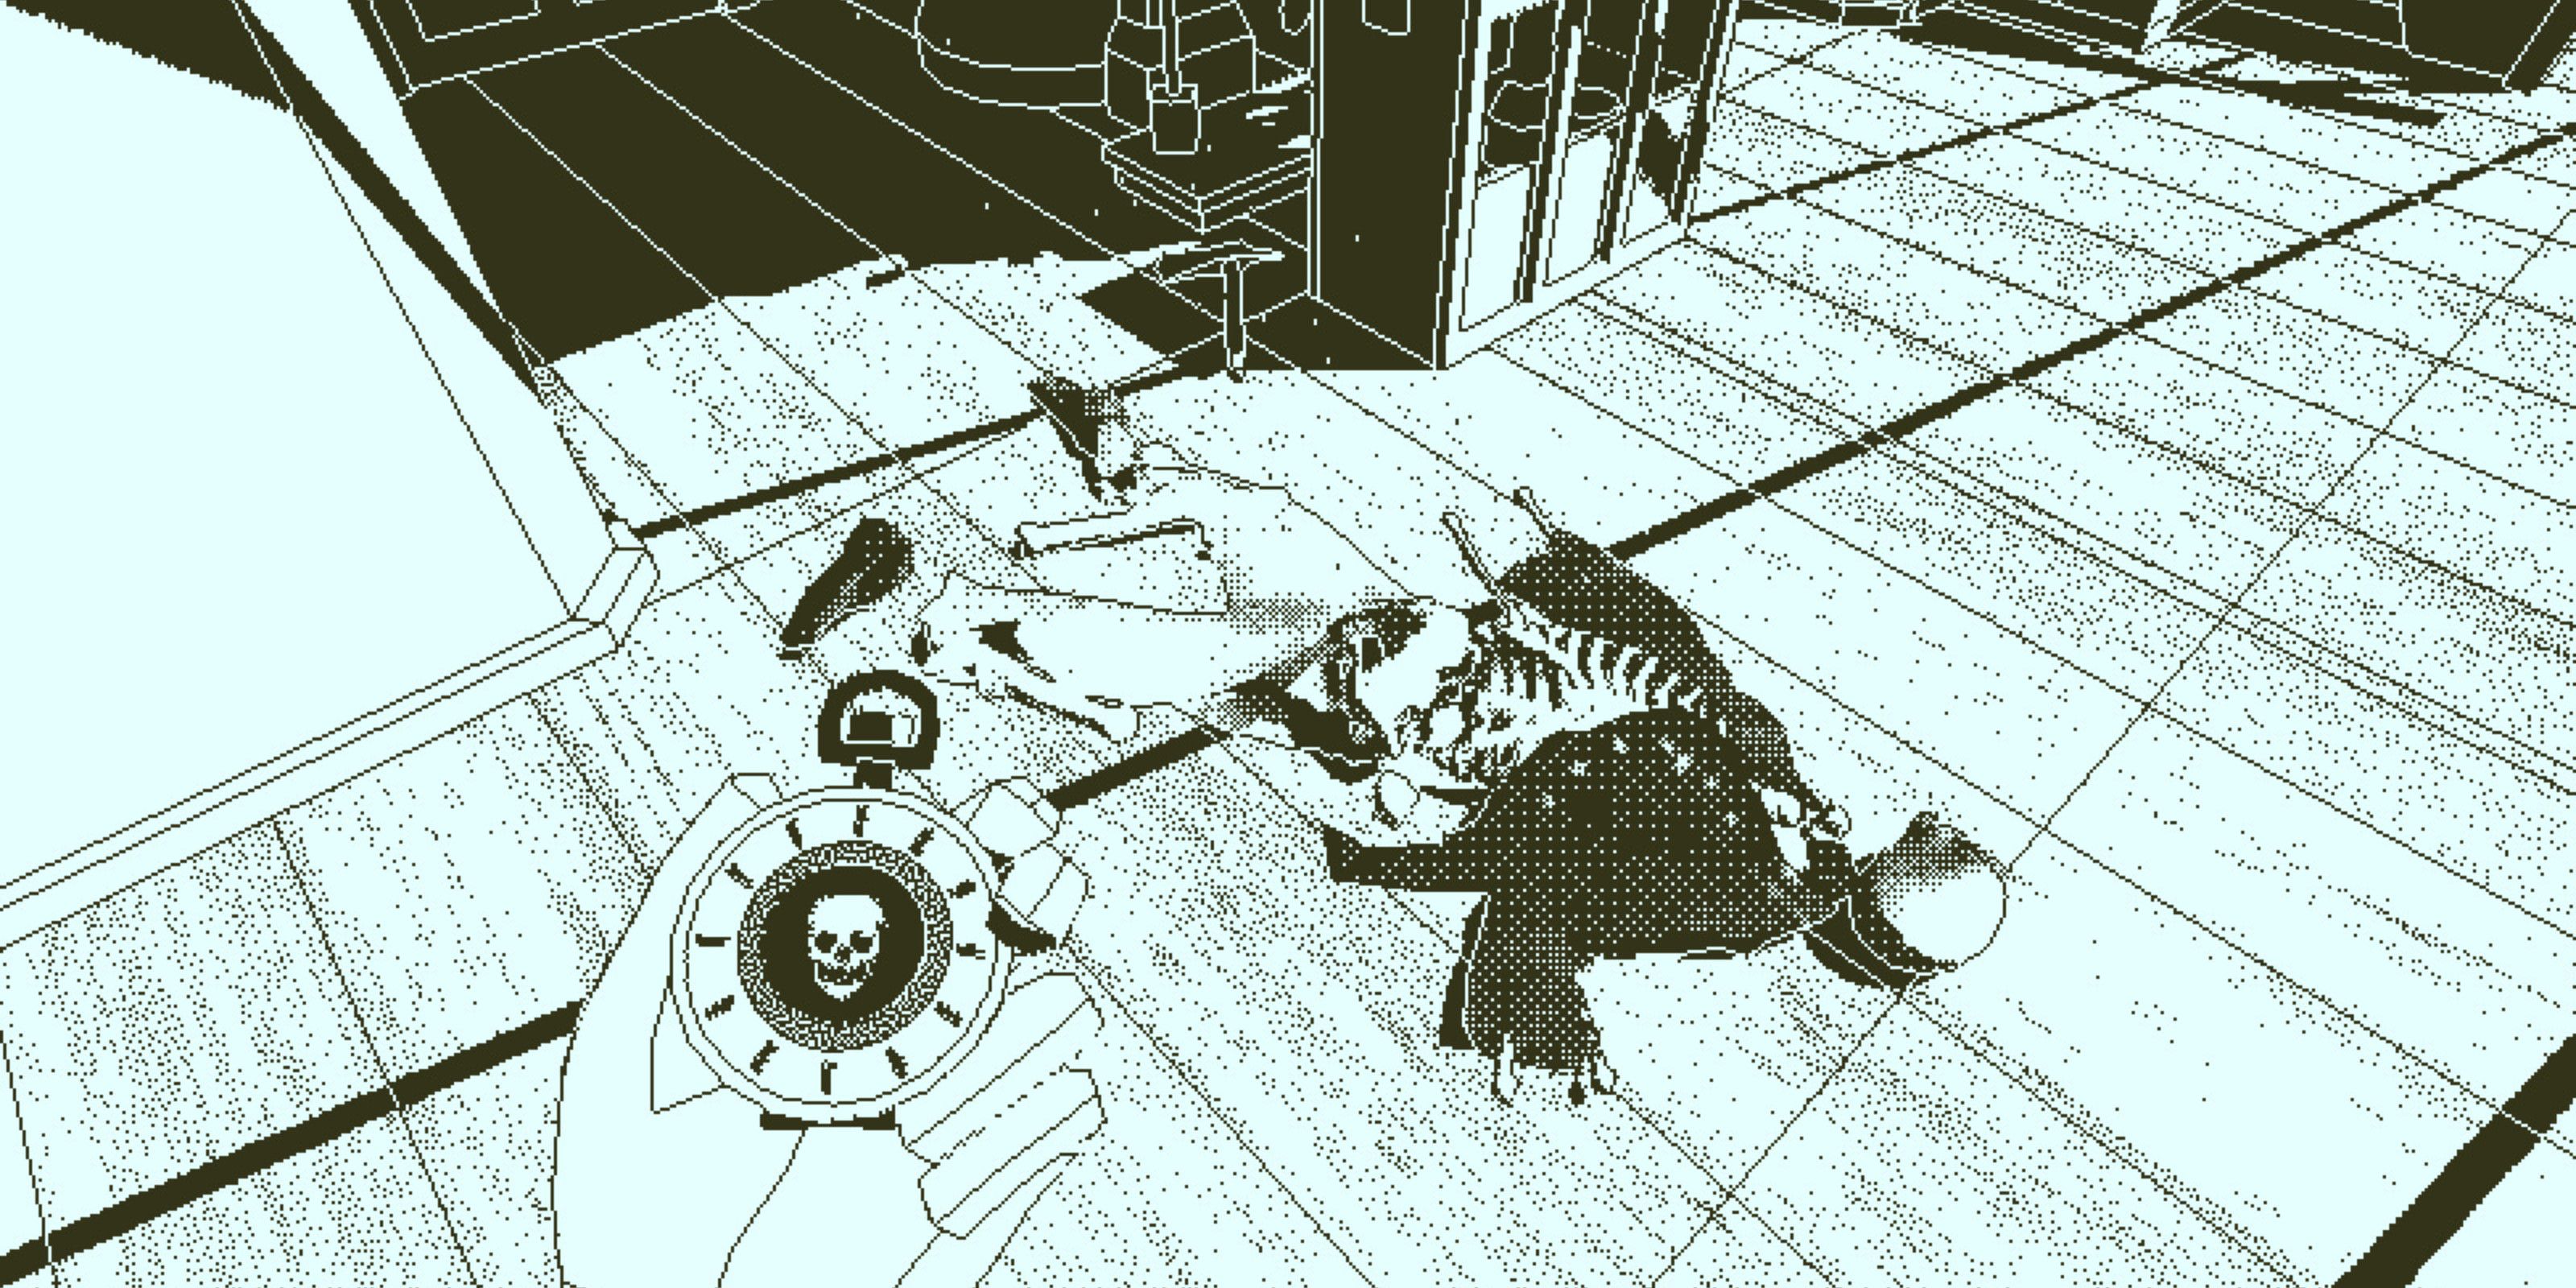 return of obra dinn the memento mortem being used to investigate a crew member's cause of death